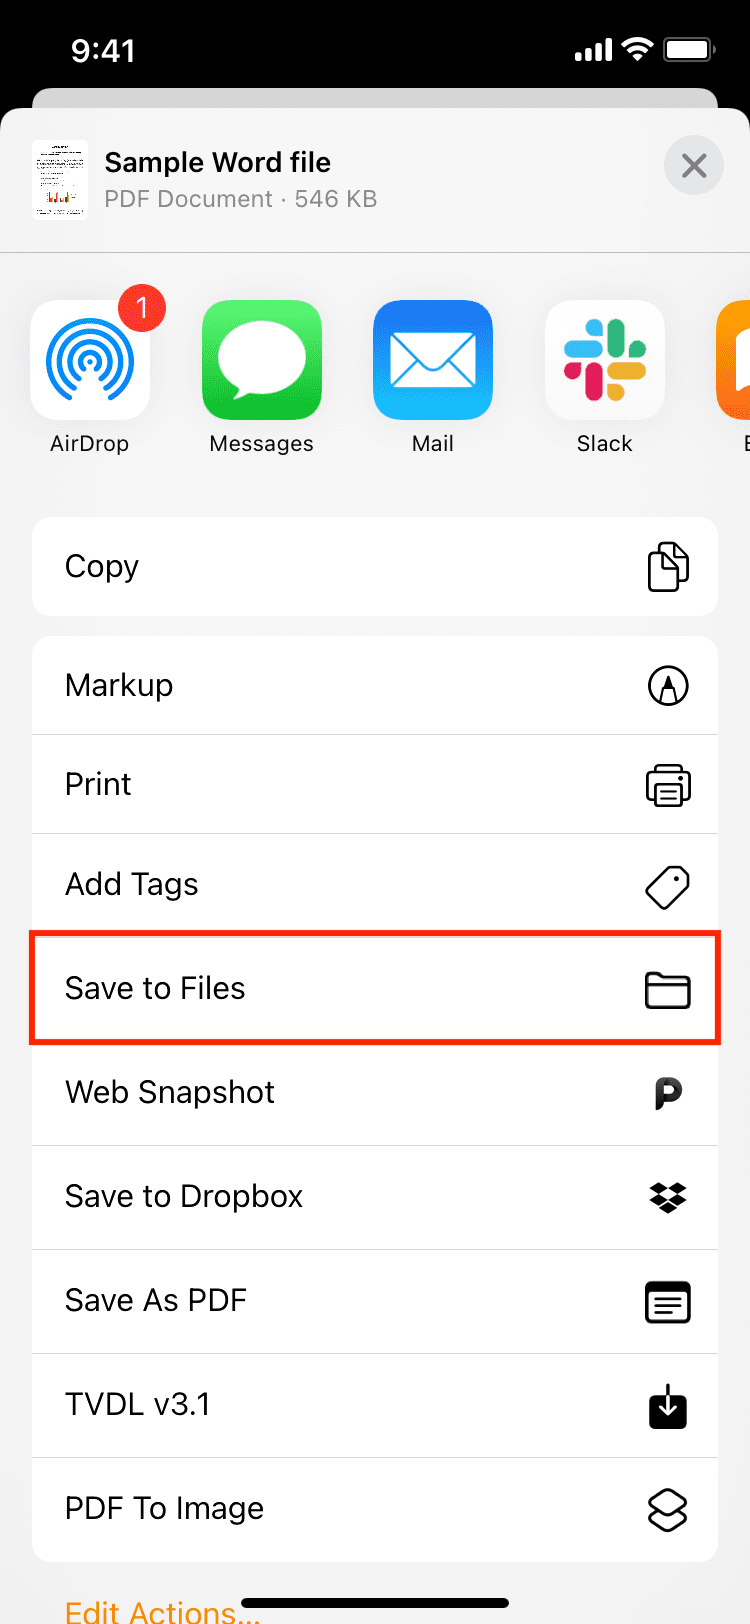 Save Word file as PDF on iPhone